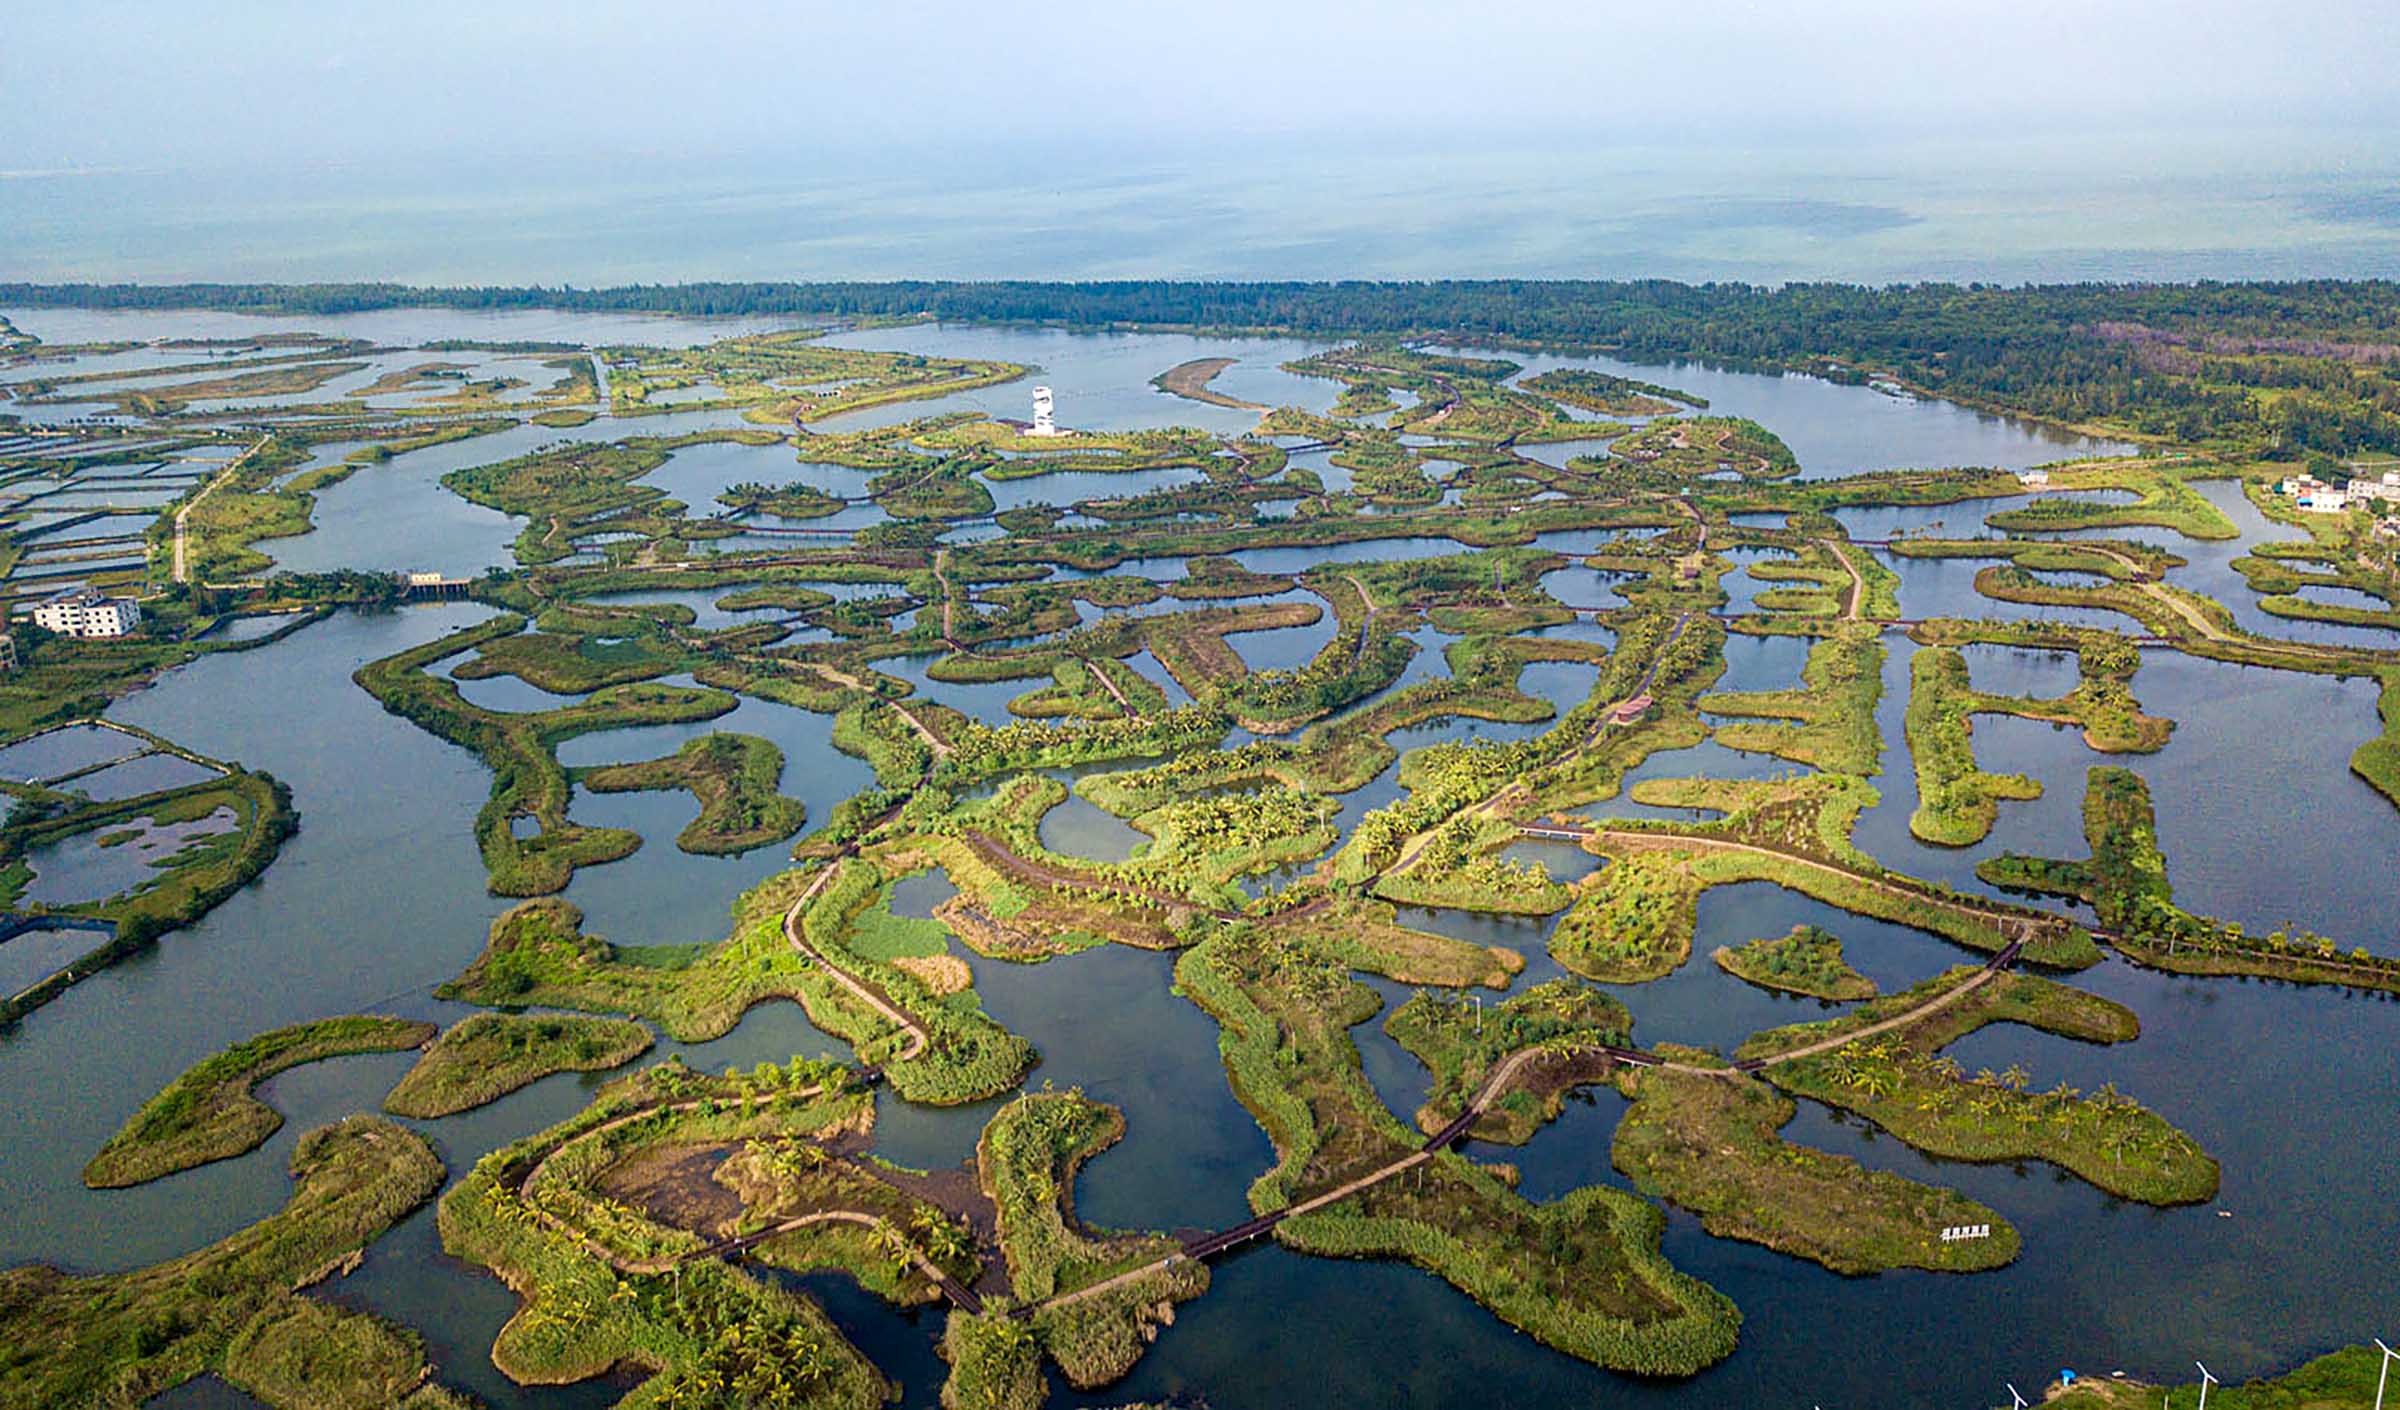 This aerial photo taken on Nov. 15, 2022 shows the scenery of the wetland of Maiya River in Haikou, south China's Hainan Province. Haikou was accredited by the Ramsar Convention as an international wetland city in 2018. The wetland coverage rate of the city is about 12.7 percent. (Xinhua/Pu Xiaoxu)